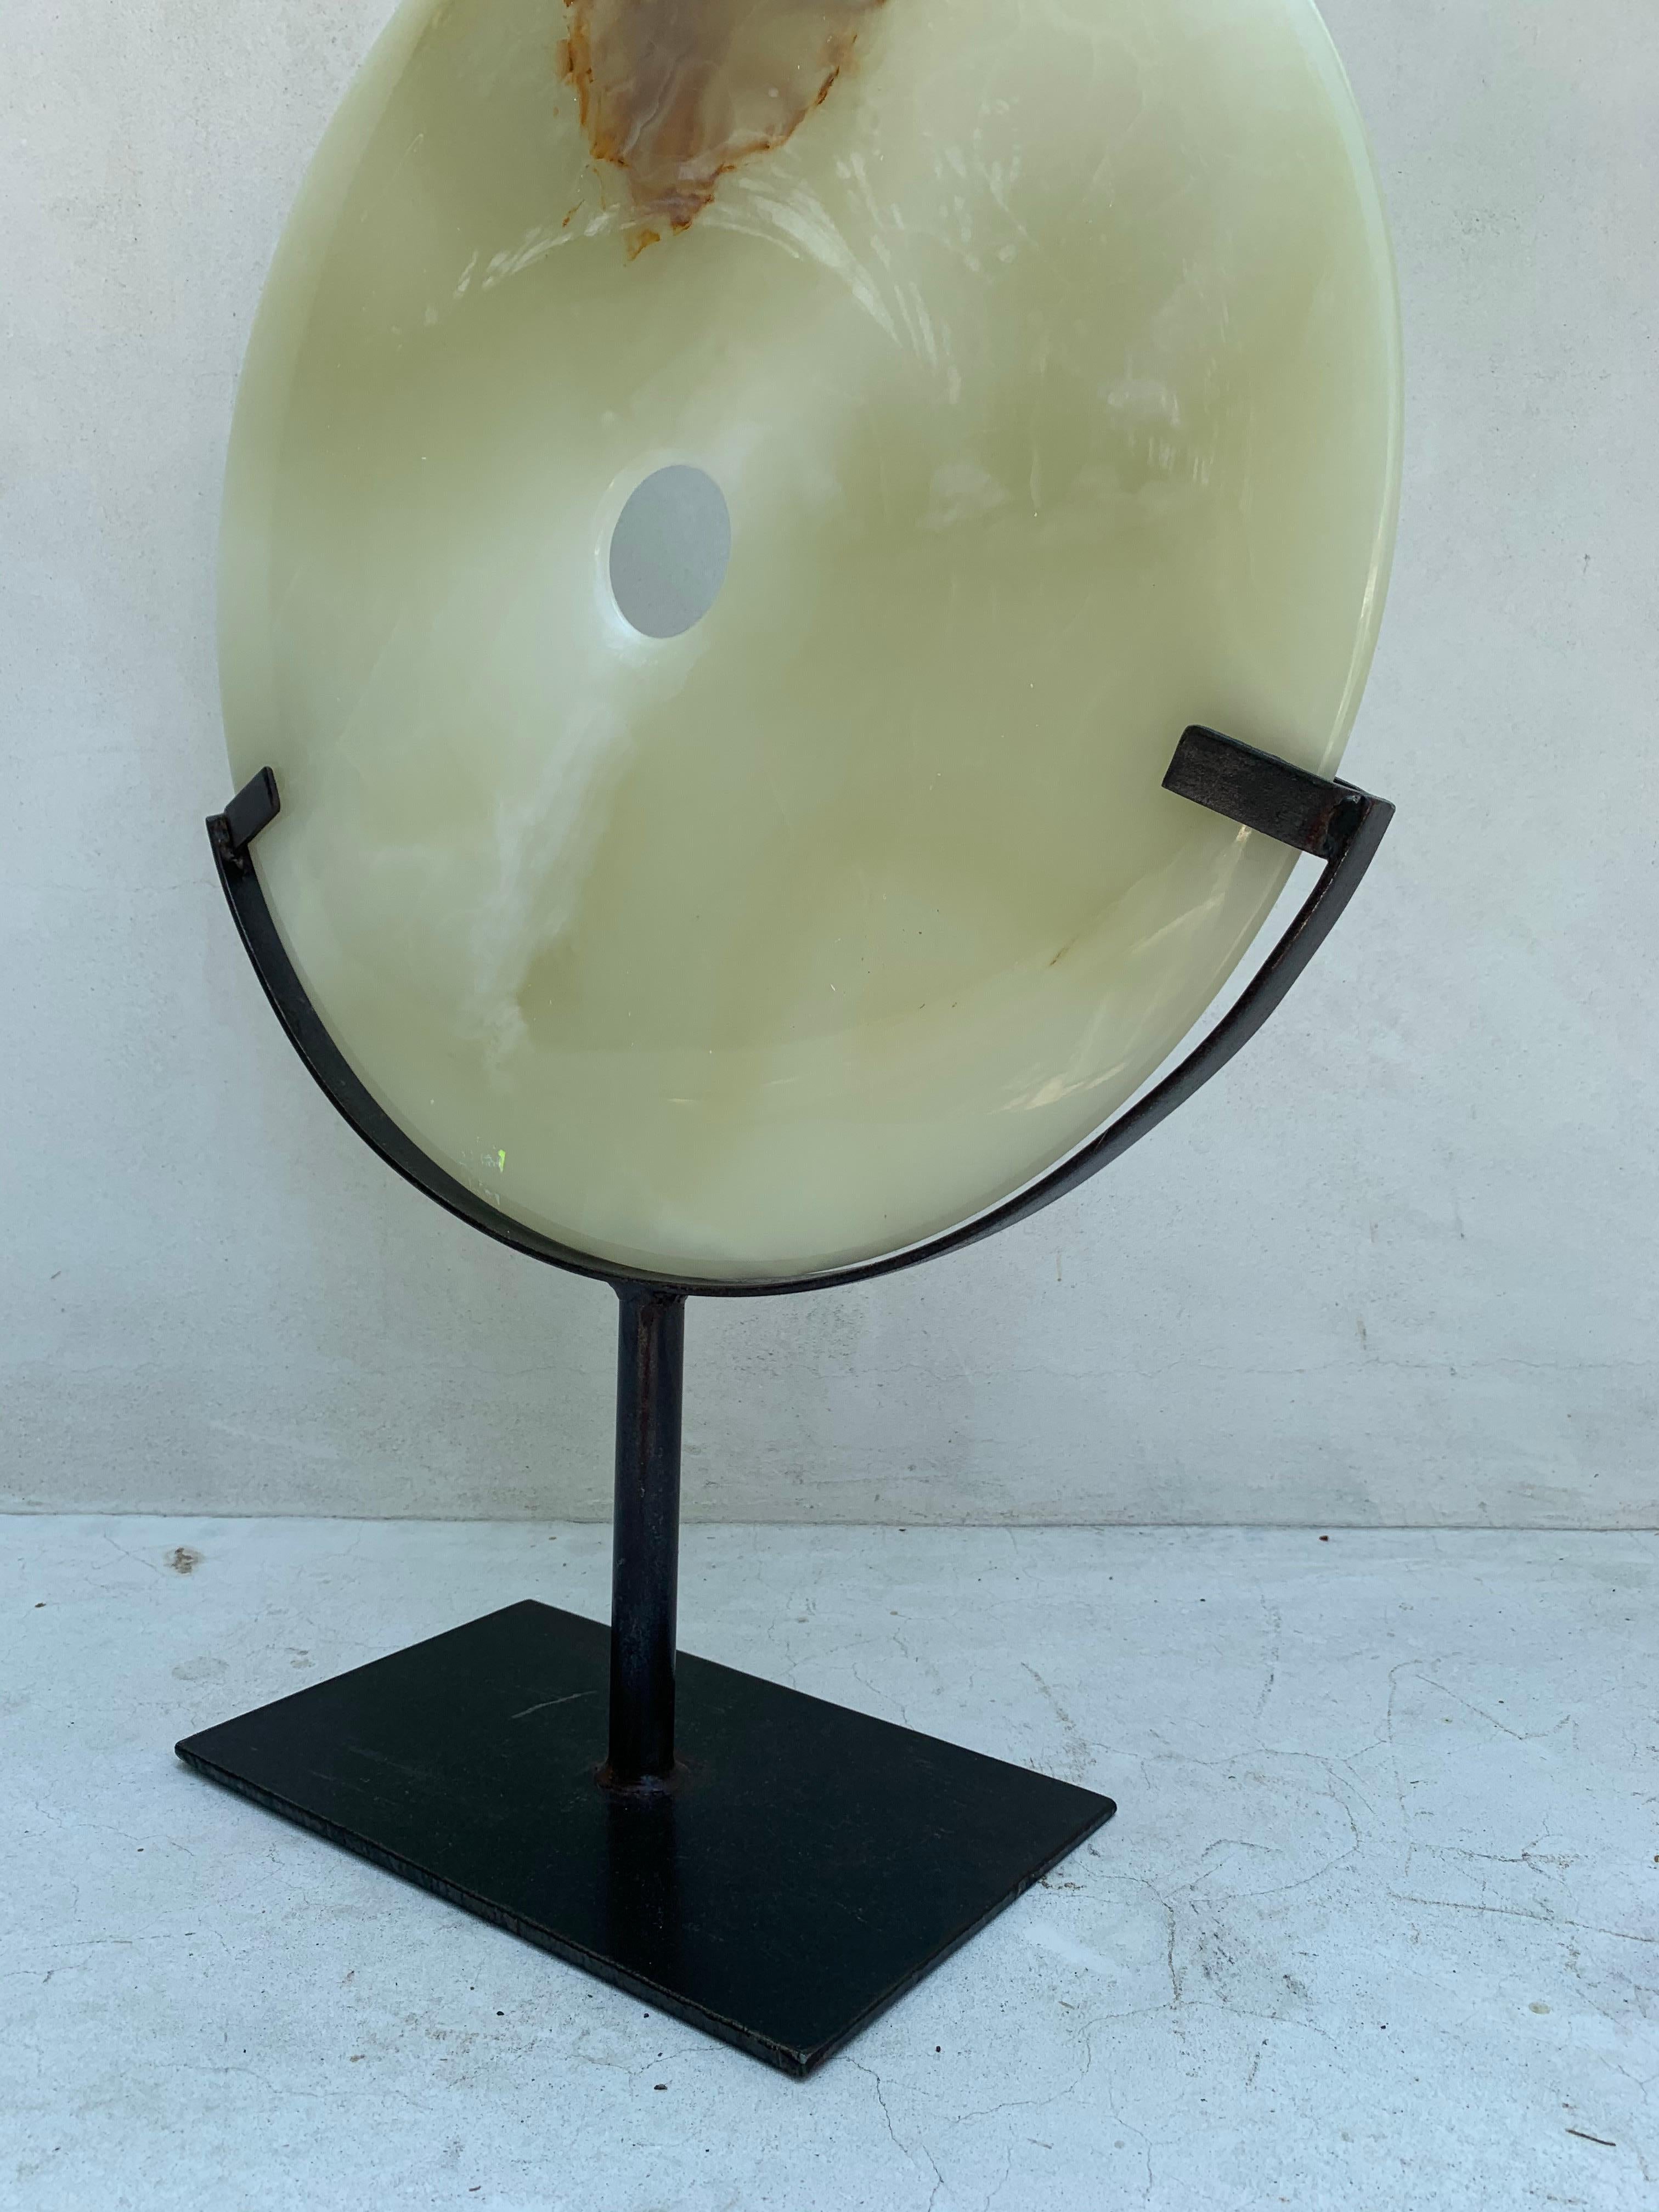 Polished Onyx Sculpture on a Metal Stand 1